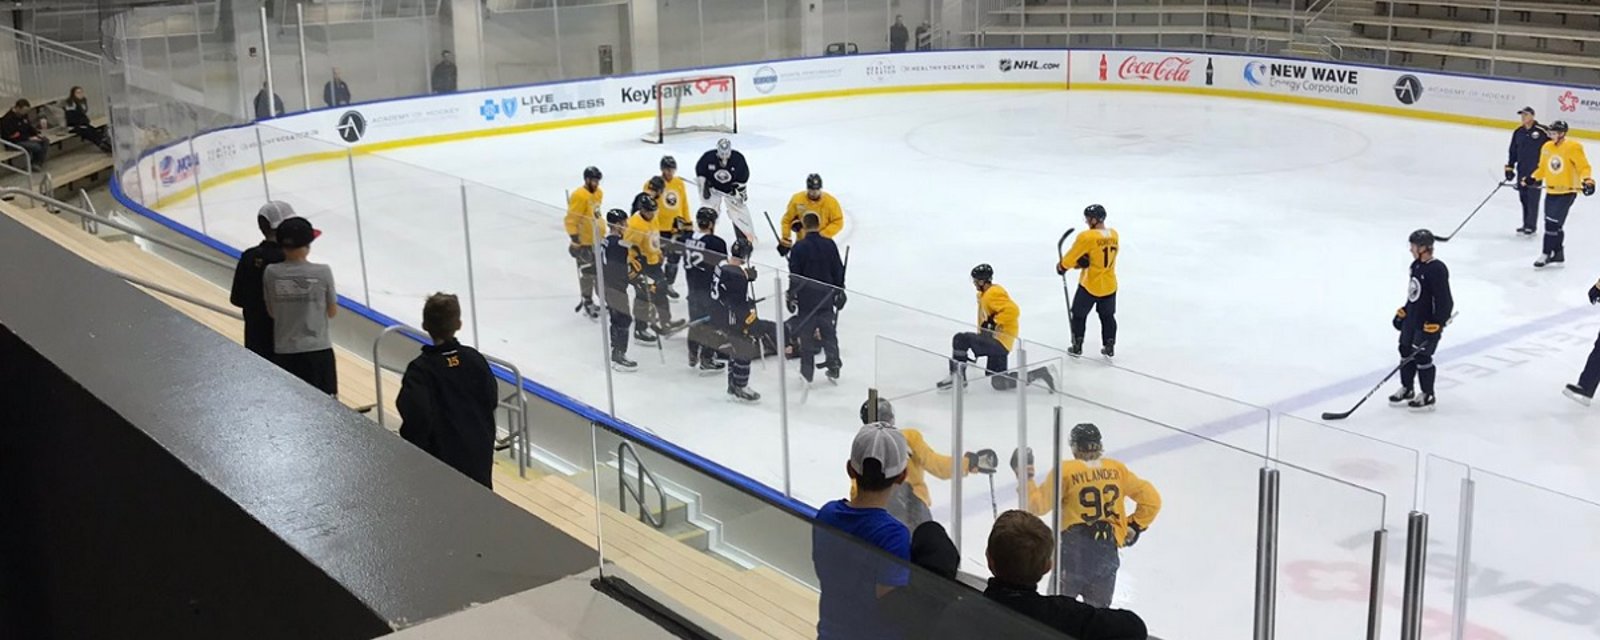 Breaking: NHL veteran leaves practice in a wheelchair after being injured on the ice.